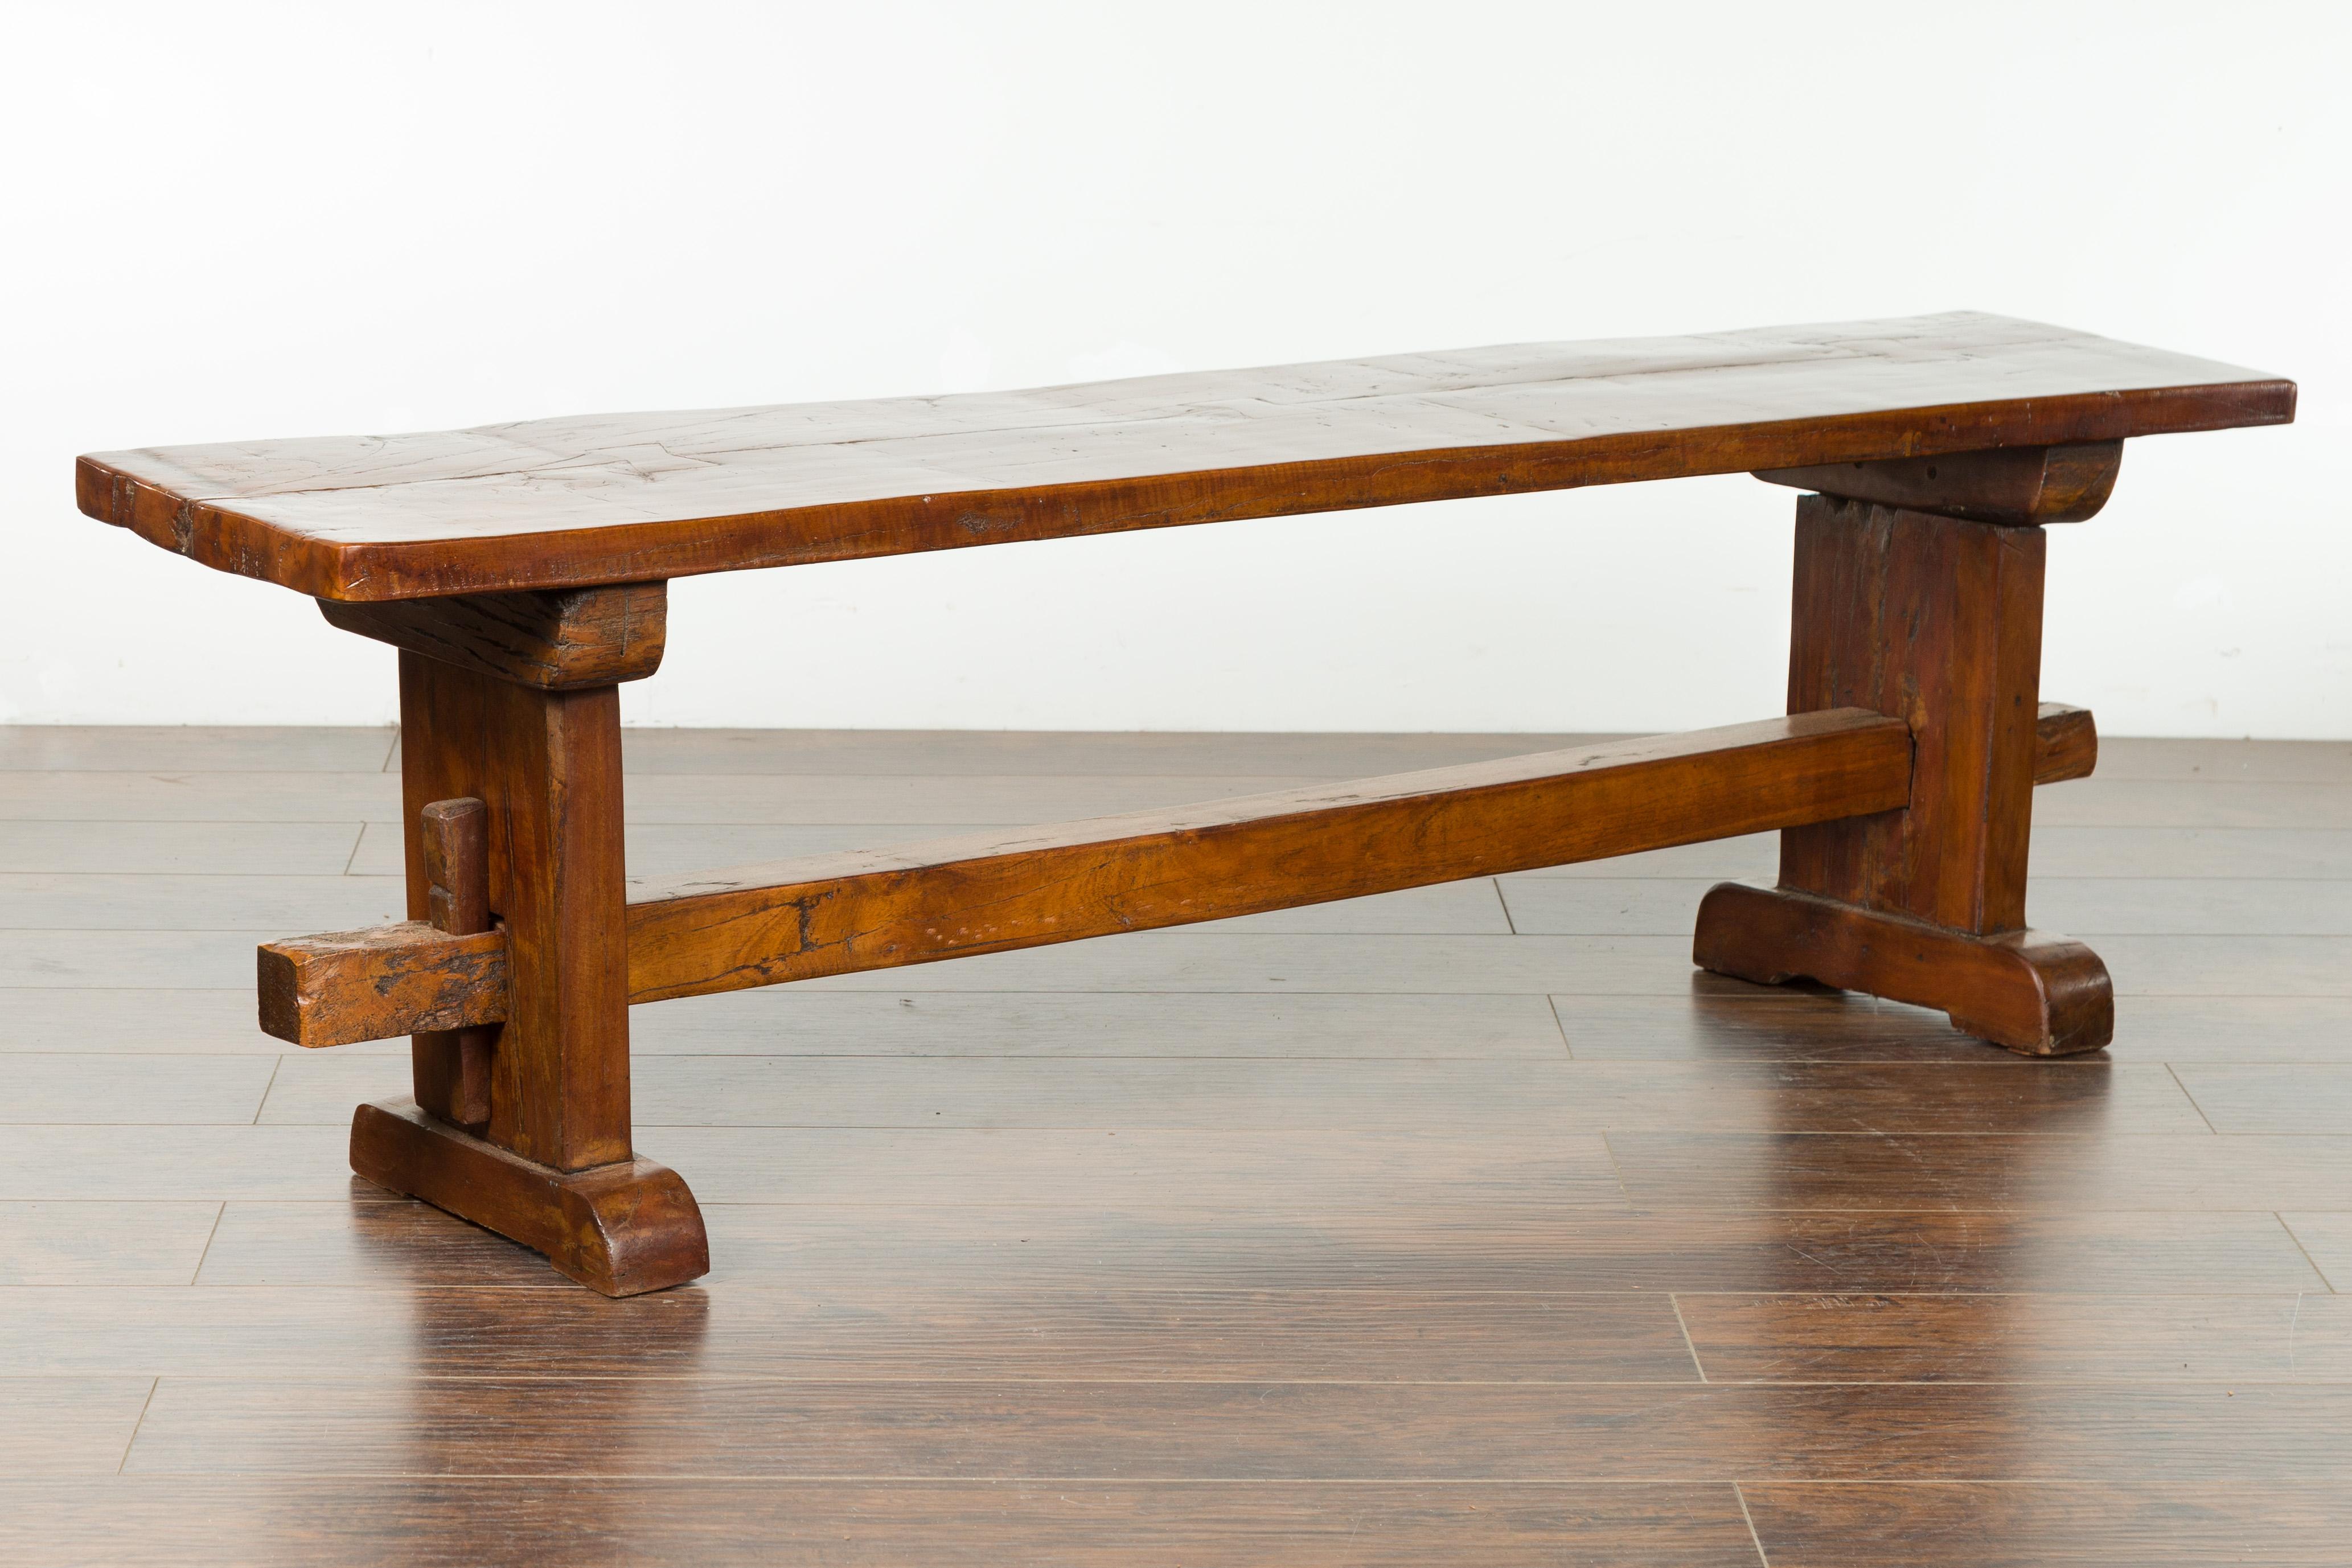 An Italian walnut bench from the early 19th century, with trestle base. Created in Italy during the first quarter of the 19th century, this walnut bench charms us with its rustic presence and nicely weathered patina. A rectangular top sits above a